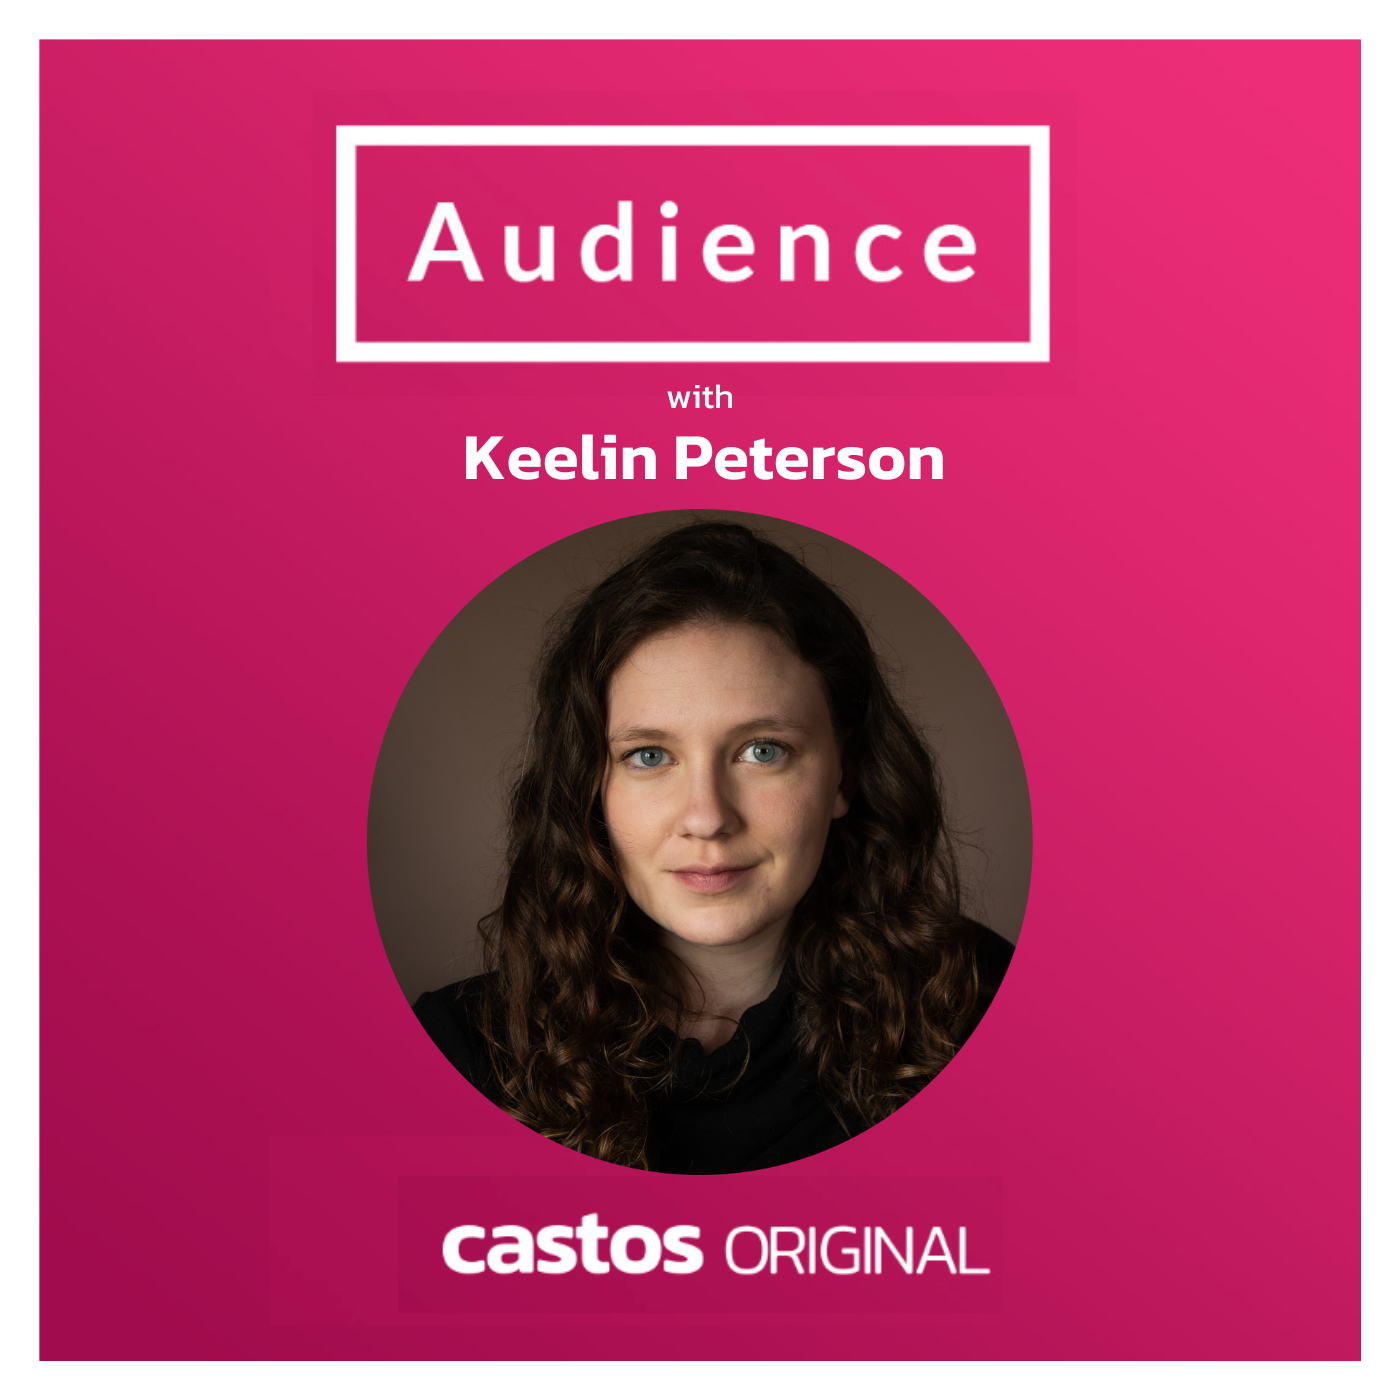 We Need Podcast Critics - with Keelin Peterson